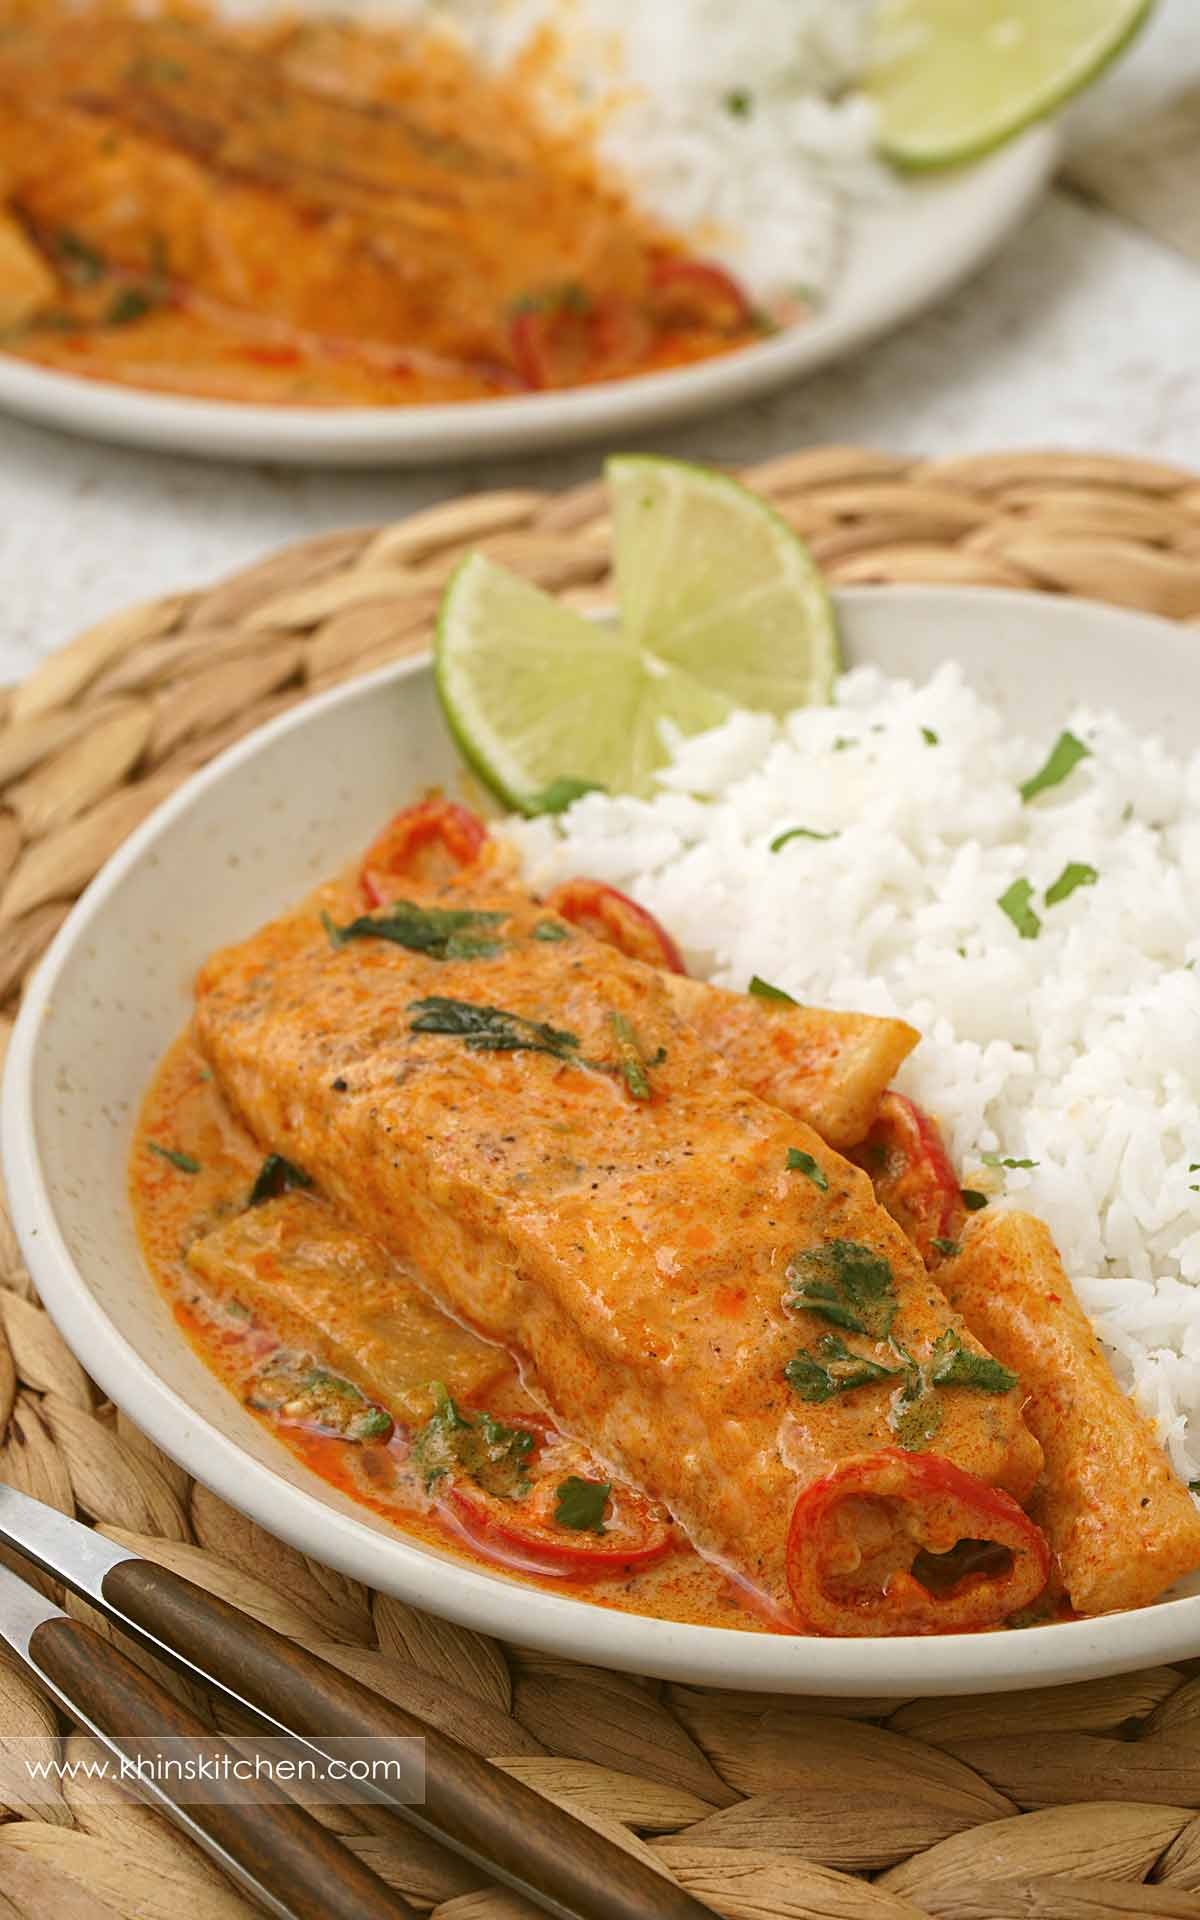 A grey plate containing salmon curry in creamy sauce, sliced bamboo shoots, sliced chilies and white rice on the side.